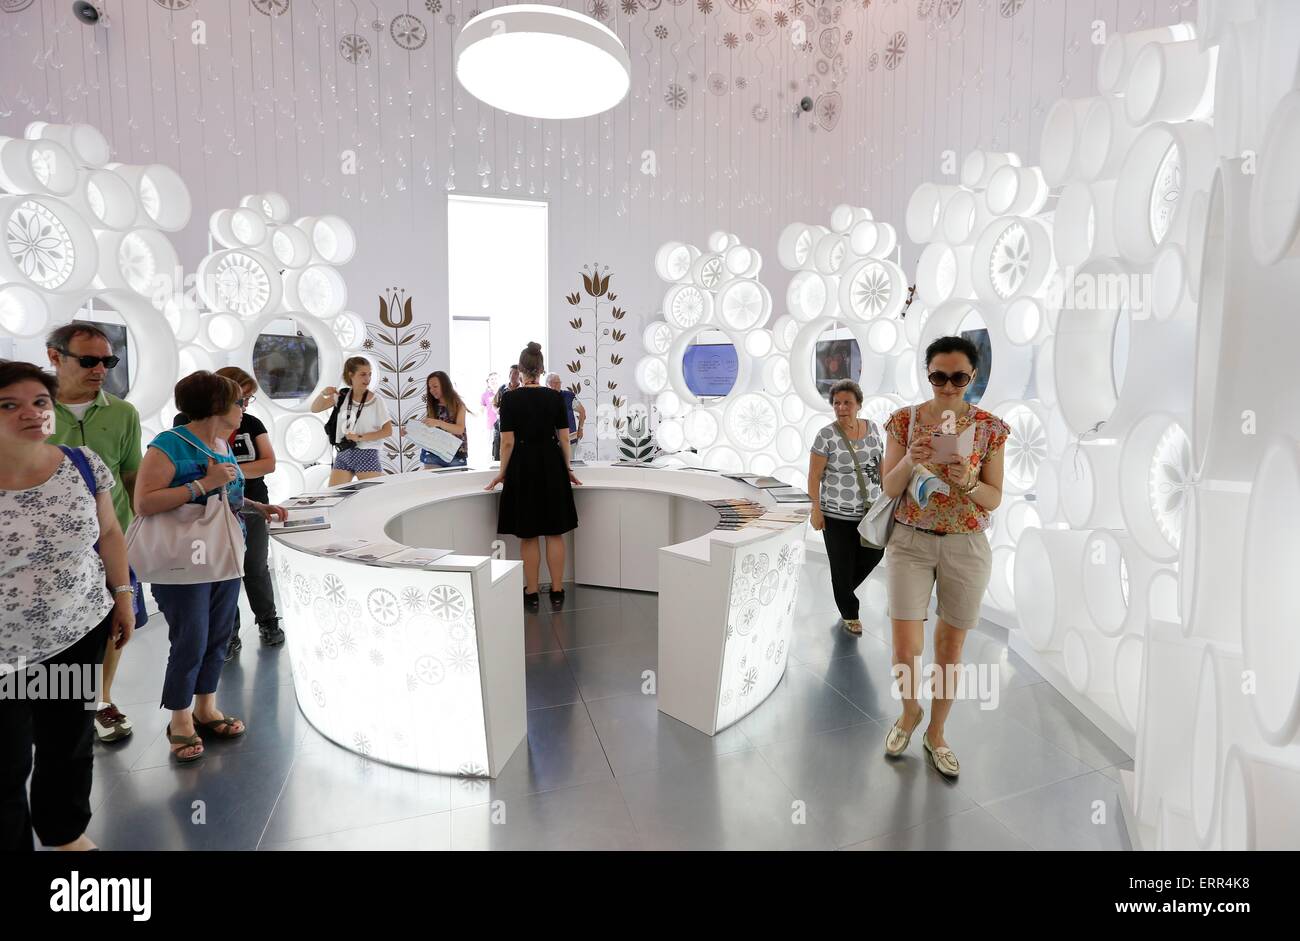 Milan, Italy. 7th June, 2015. People visit Lithuania Pavilion at Milan Expo in Milan, Italy, June 7, 2015. The exhibition runs from May 1 to October 31 with the theme of 'Feeding the Planet, Energy for Life'. Credit:  Ye Pingfan/Xinhua/Alamy Live News Stock Photo